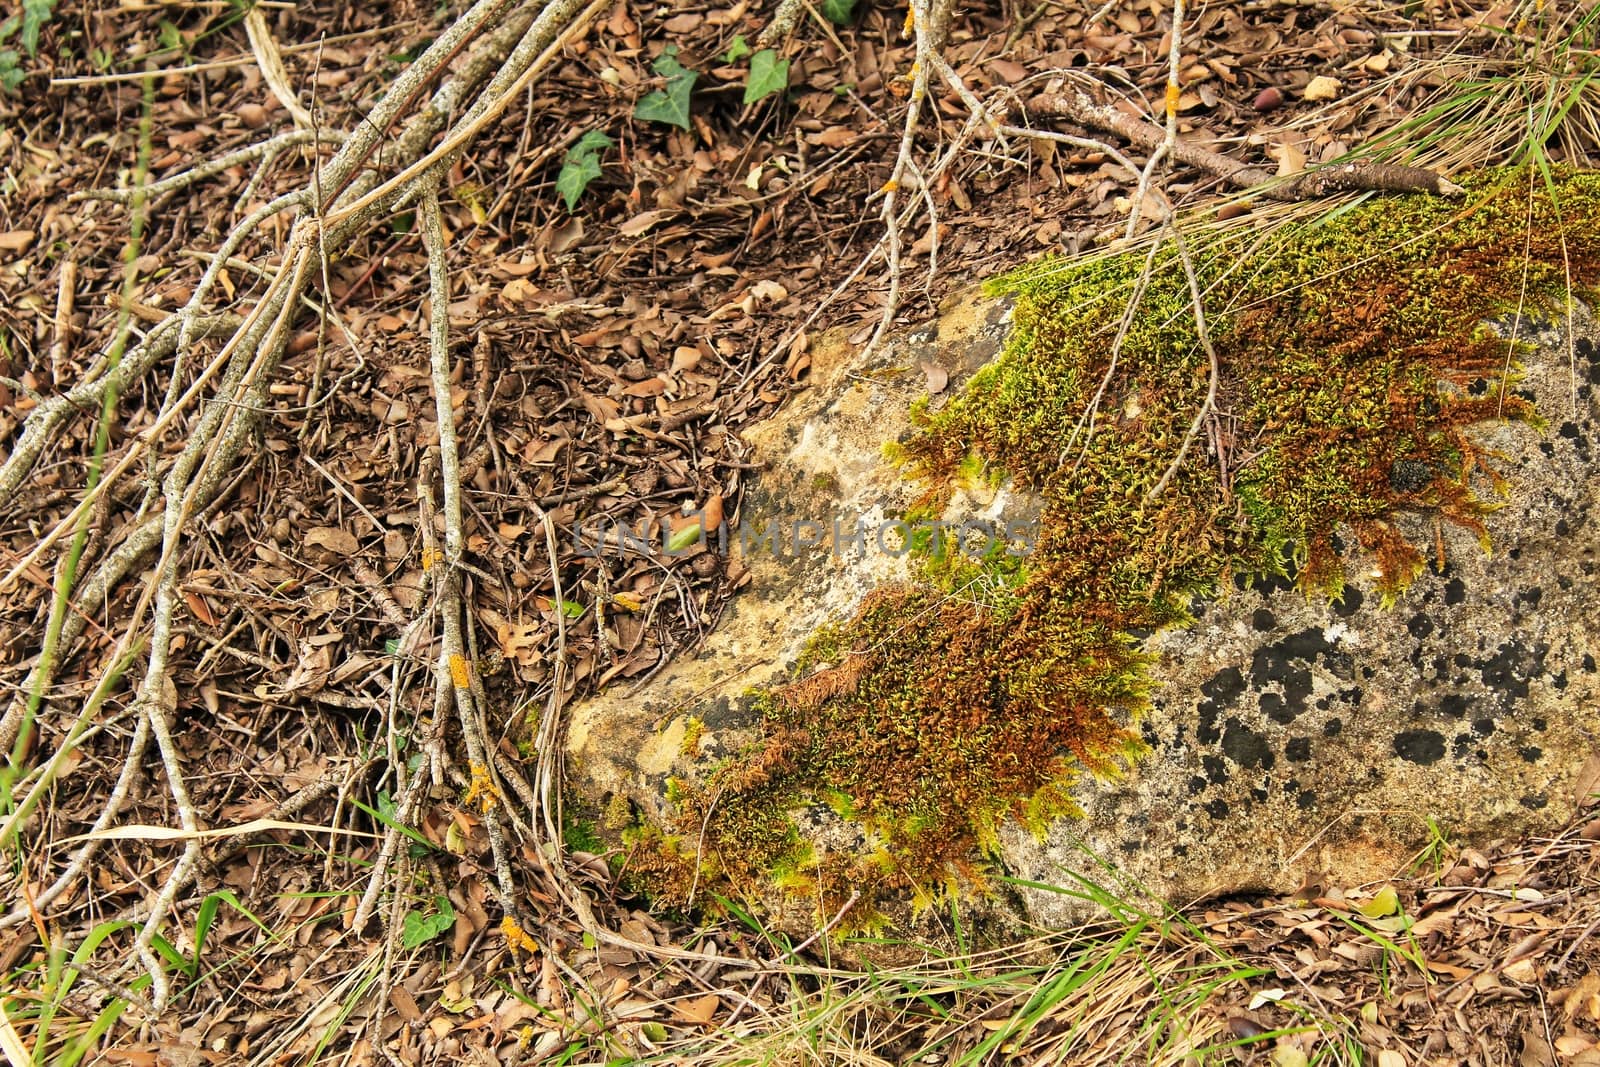 Colorful texture of moss on gray stone surrounded by leaves in Alcaraz